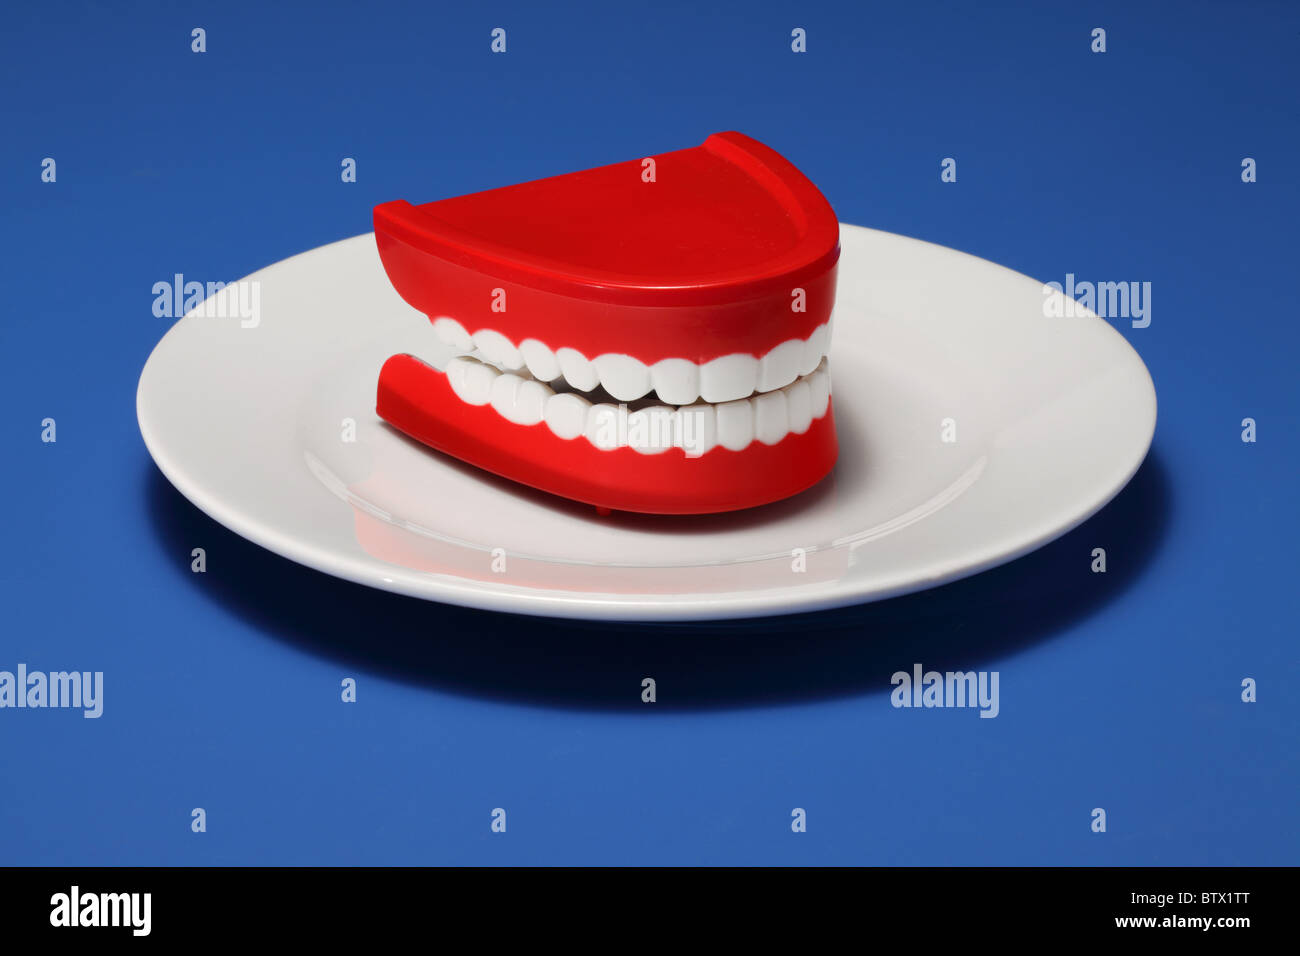 One set of plastic gums and teeth on a white dinner plate Stock Photo